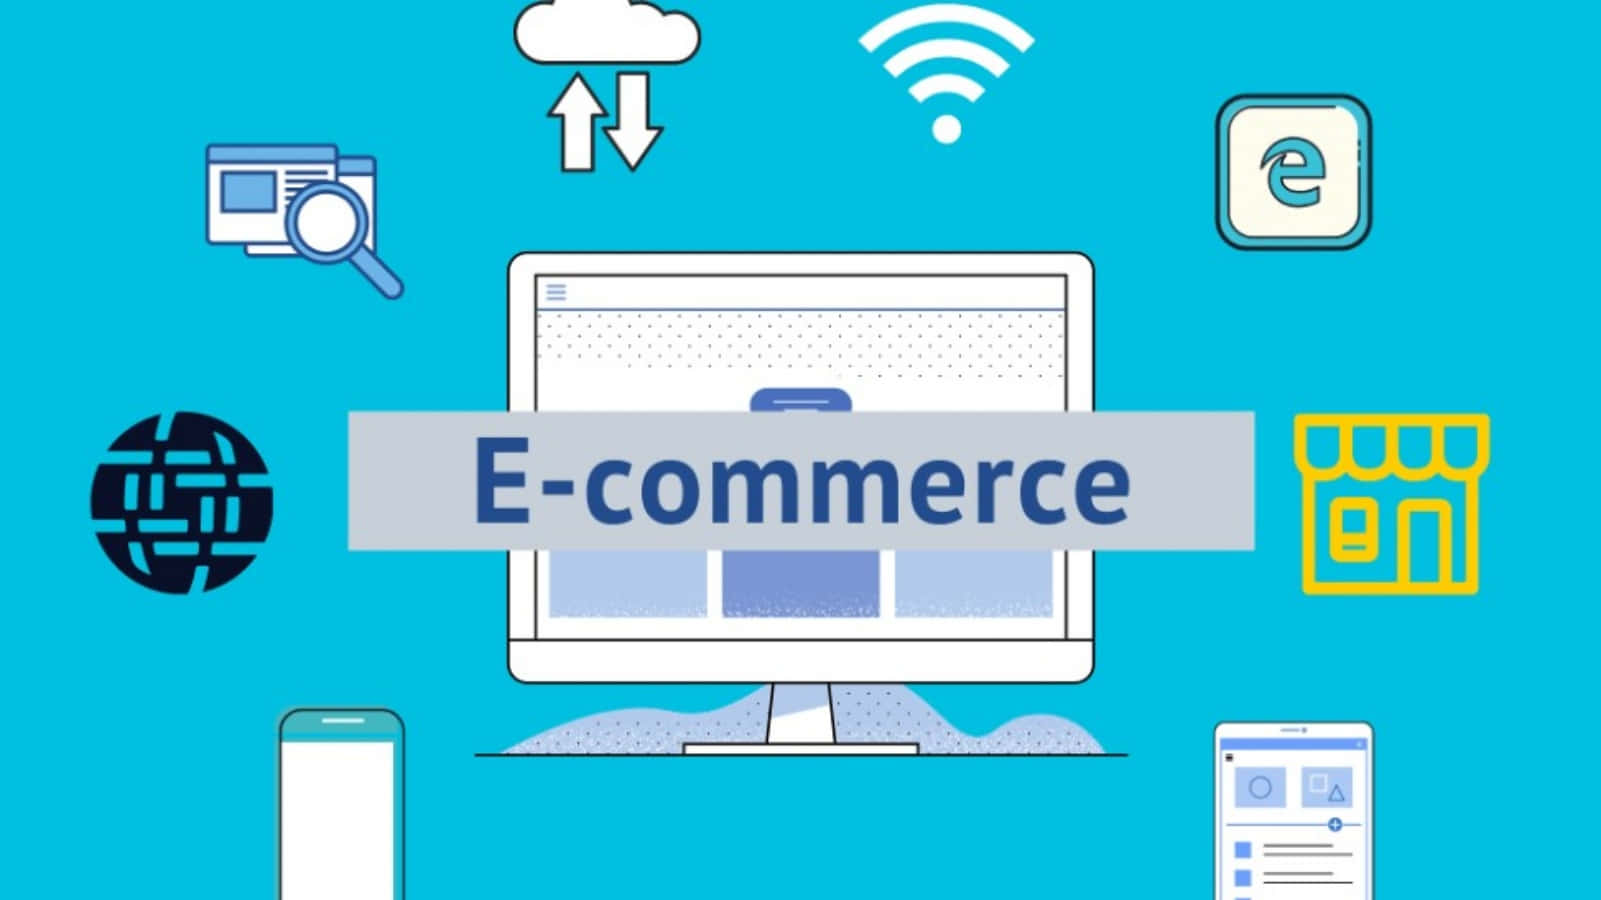 Harness the power of e-commerce to expand your business opportunities.